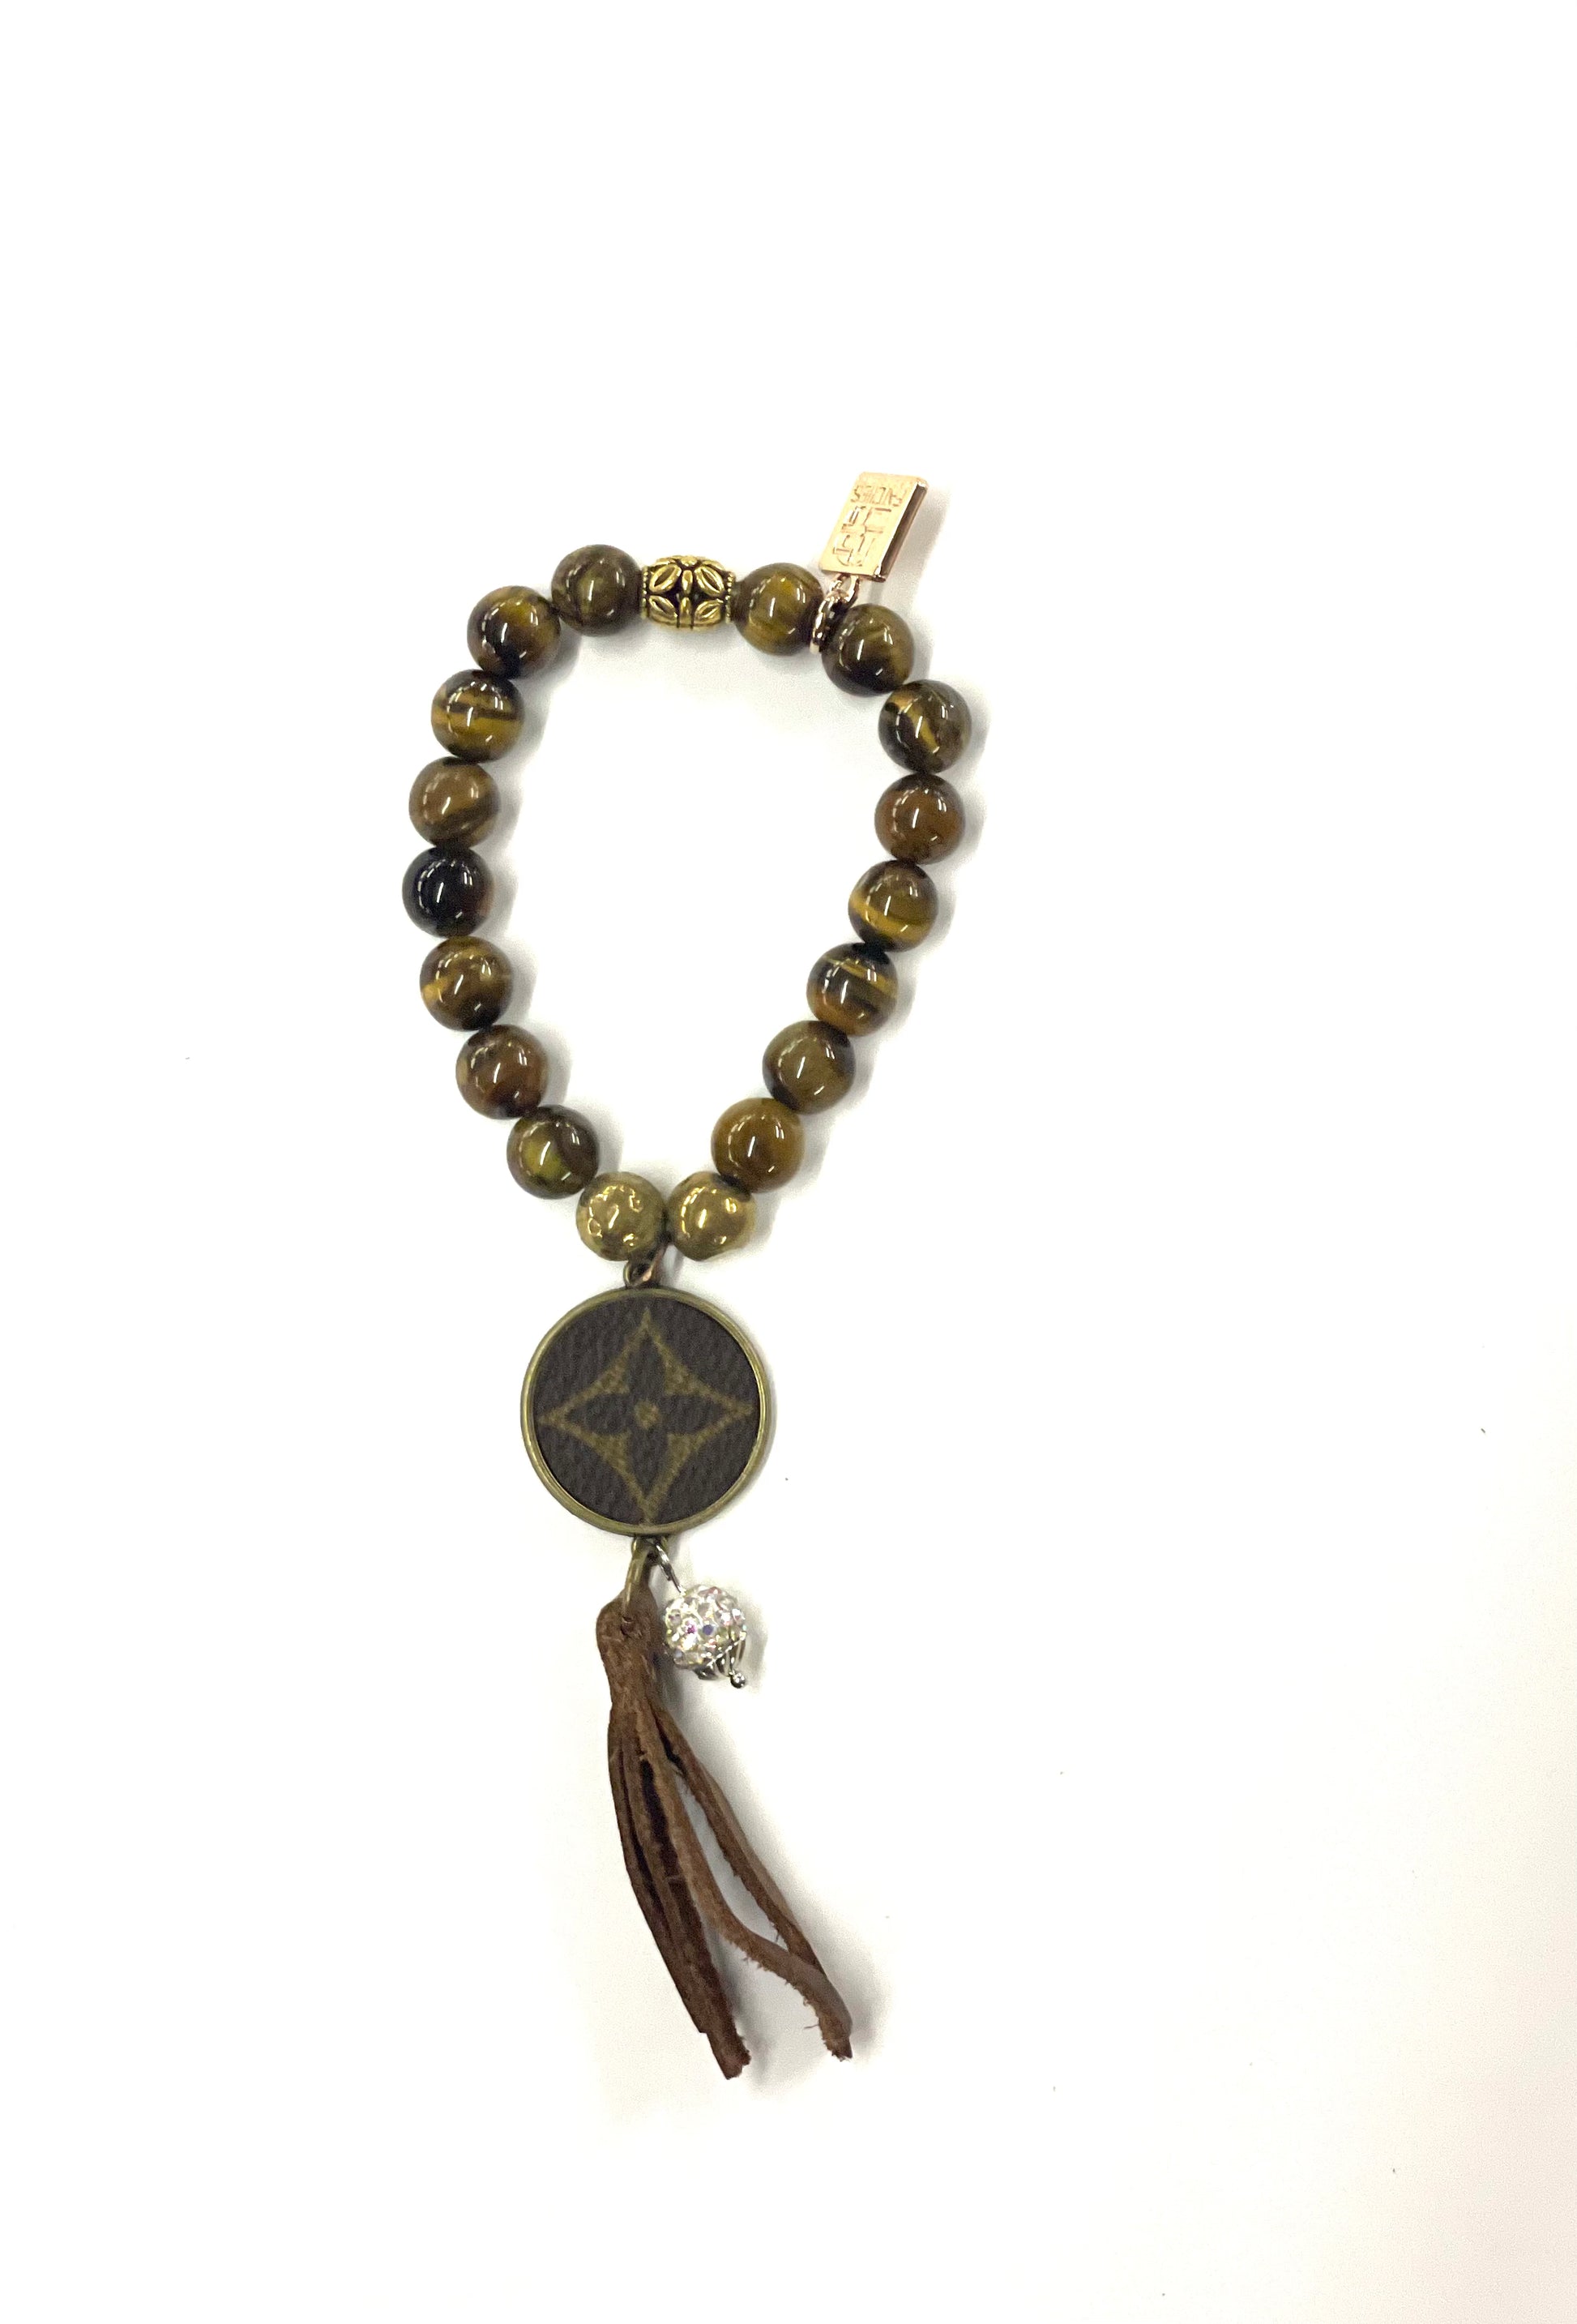 Hand beaded tiger eye stretchy bracelet with gold pendant & fringe - Patches Of Upcycling